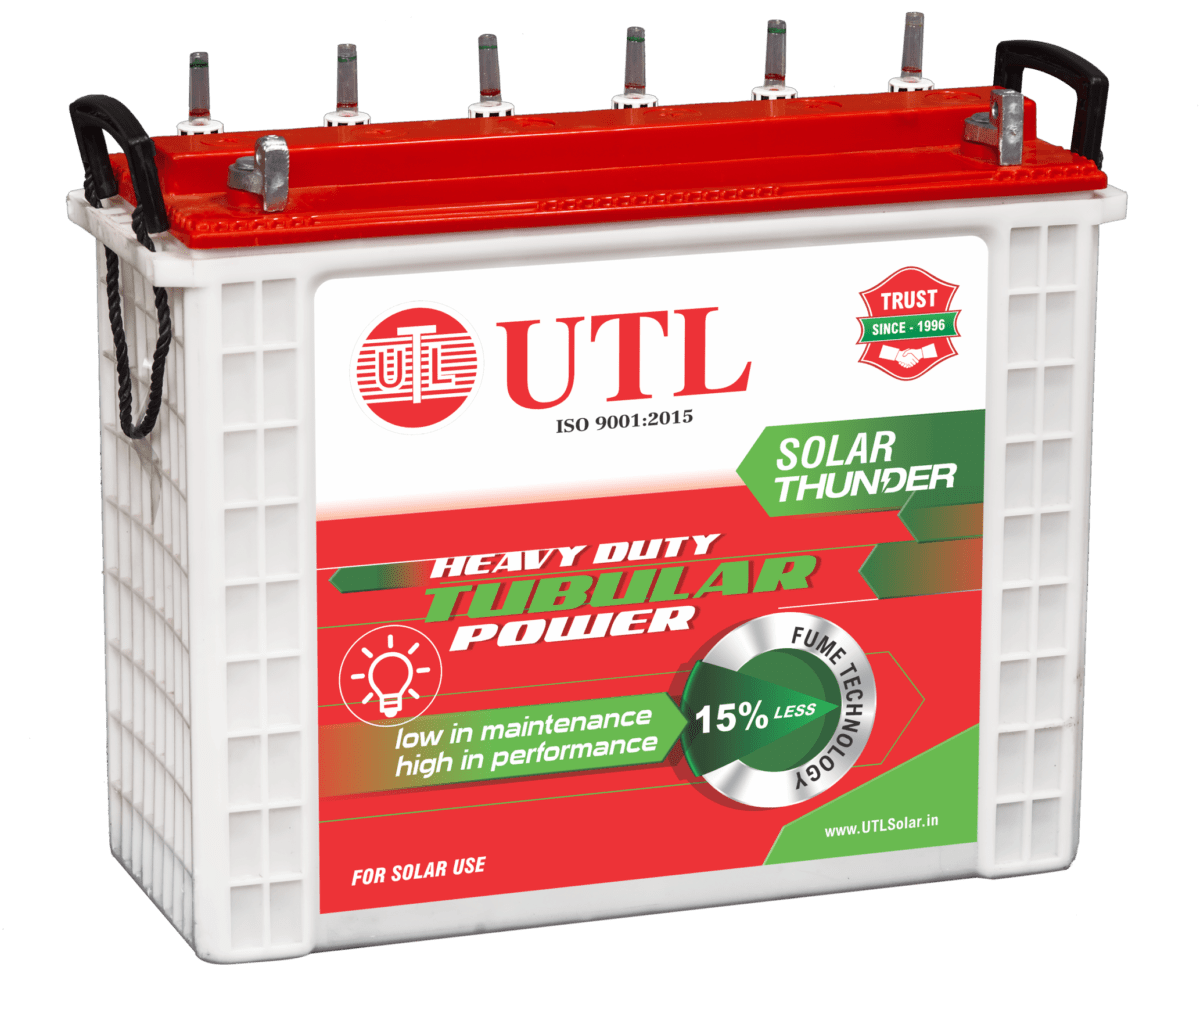 Buy UTL 200AH Solar Battery with 60 months of warranty at Best Price